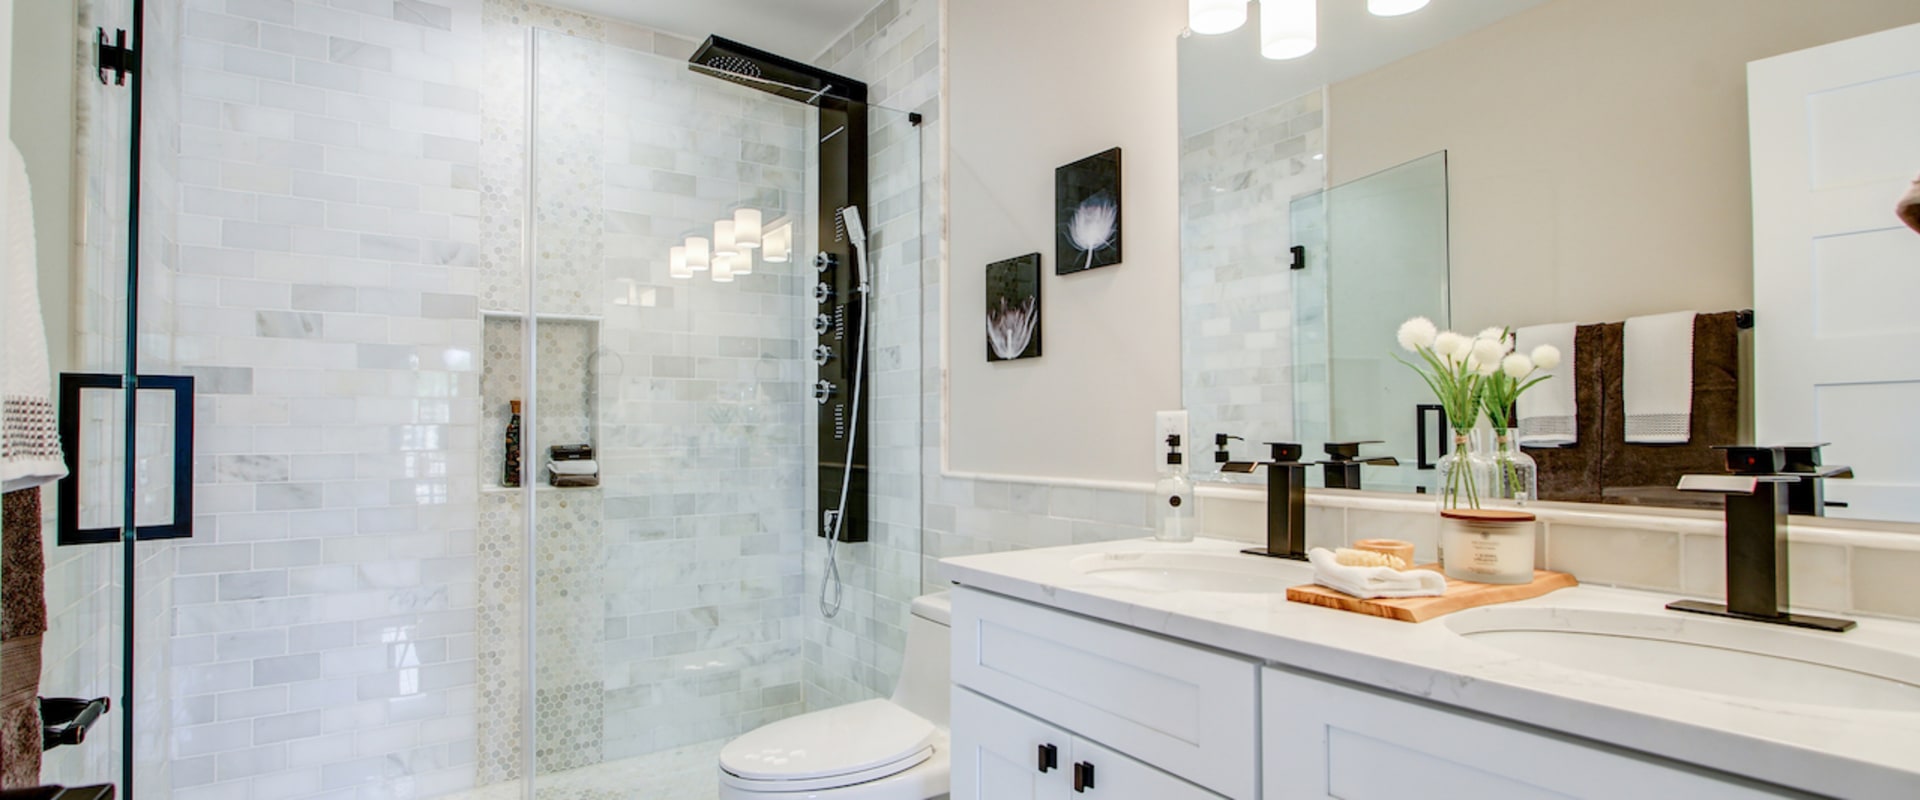 How long should it take to remodel a bathroom?